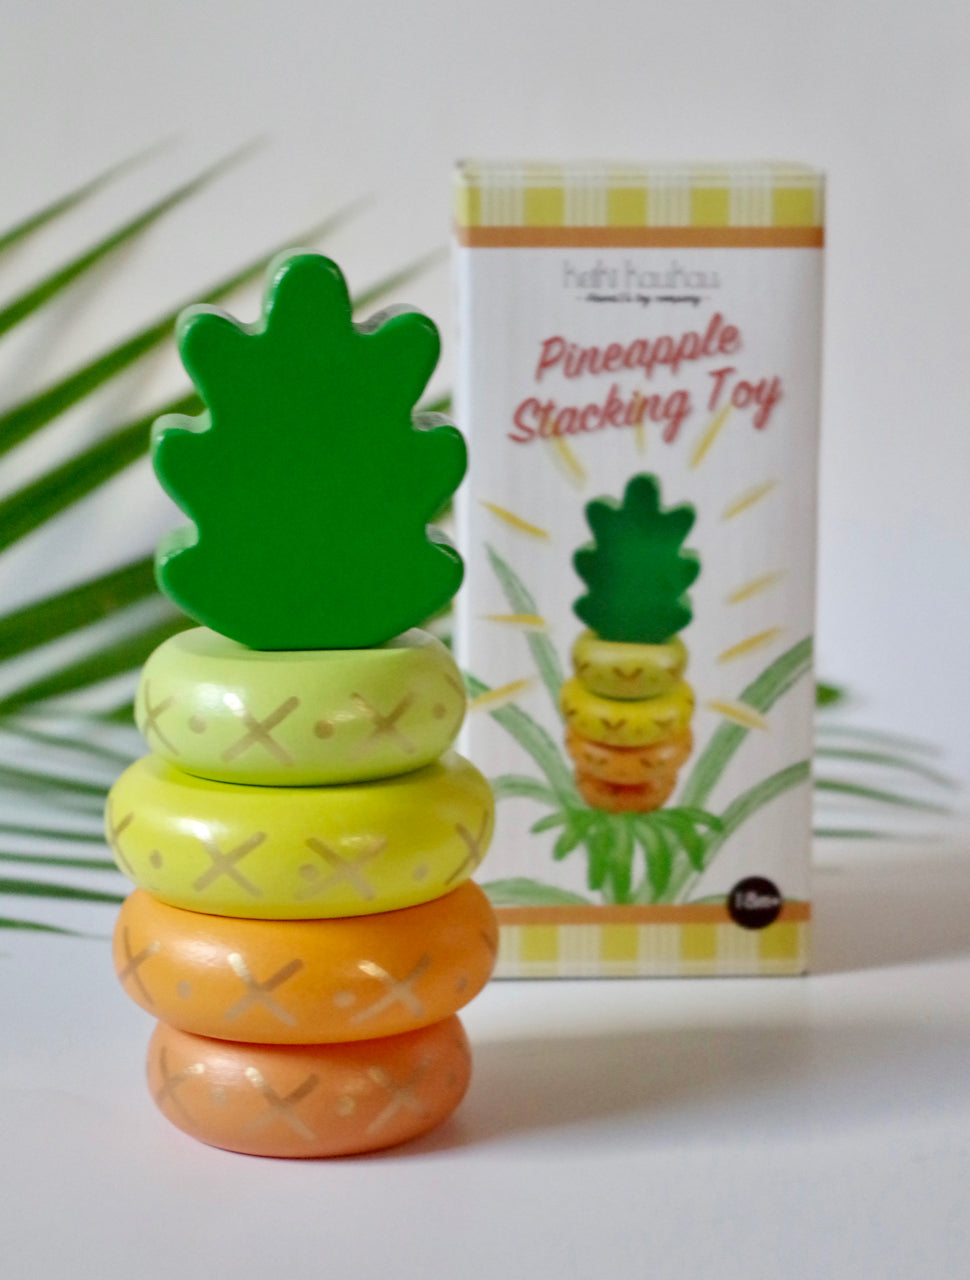 Pineapple Stacking Toy